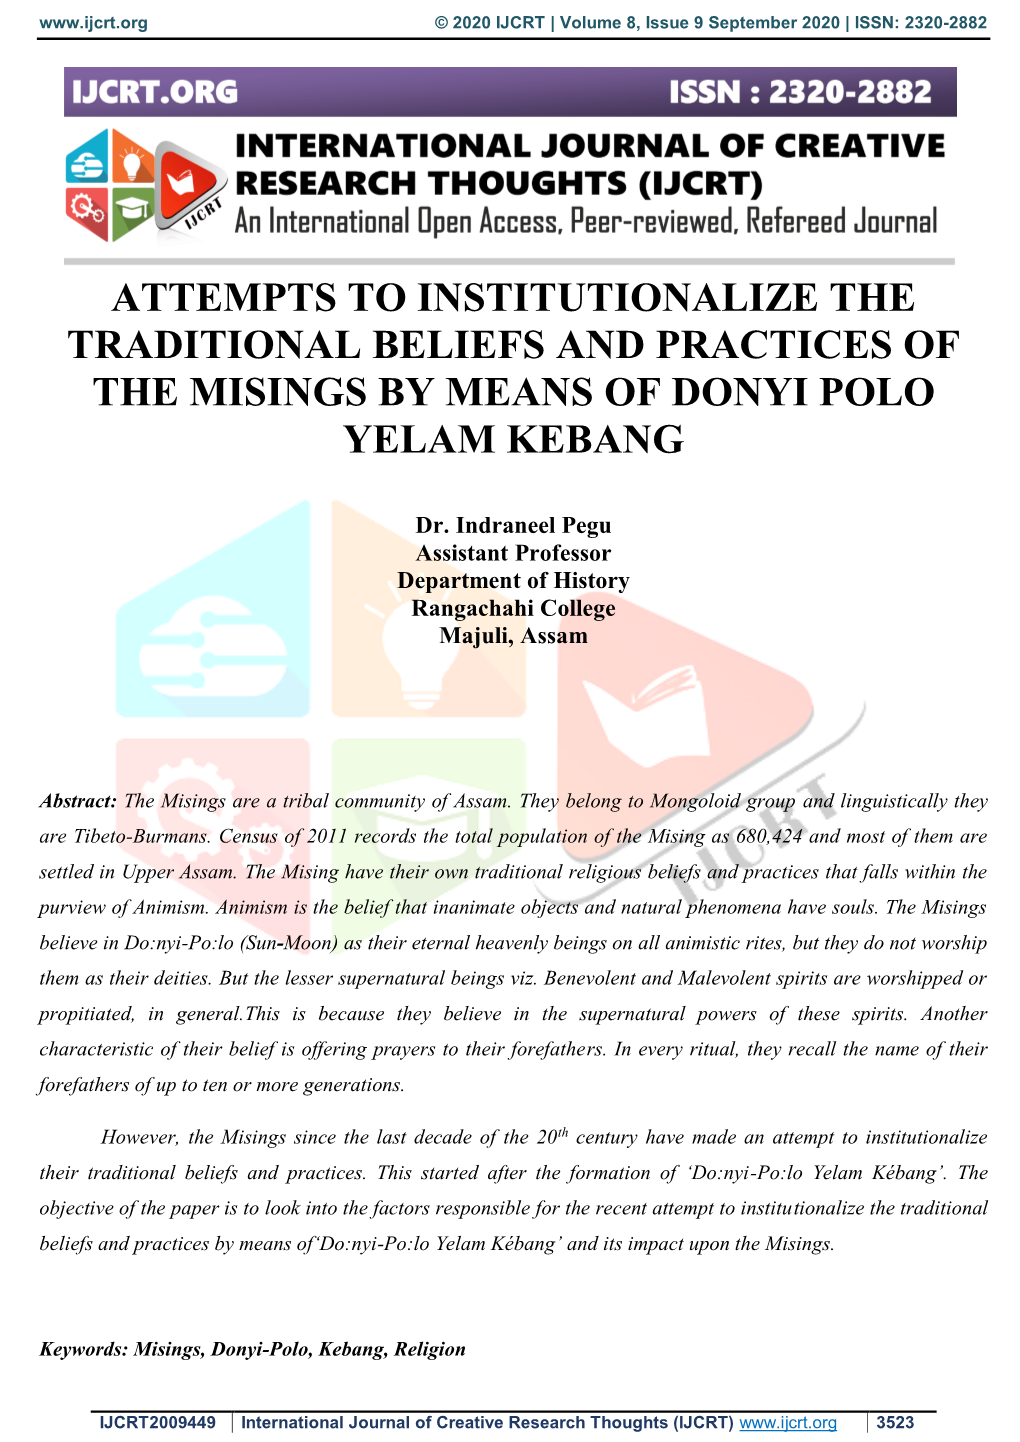 Attempts to Institutionalize the Traditional Beliefs and Practices of the Misings by Means of Donyi Polo Yelam Kebang